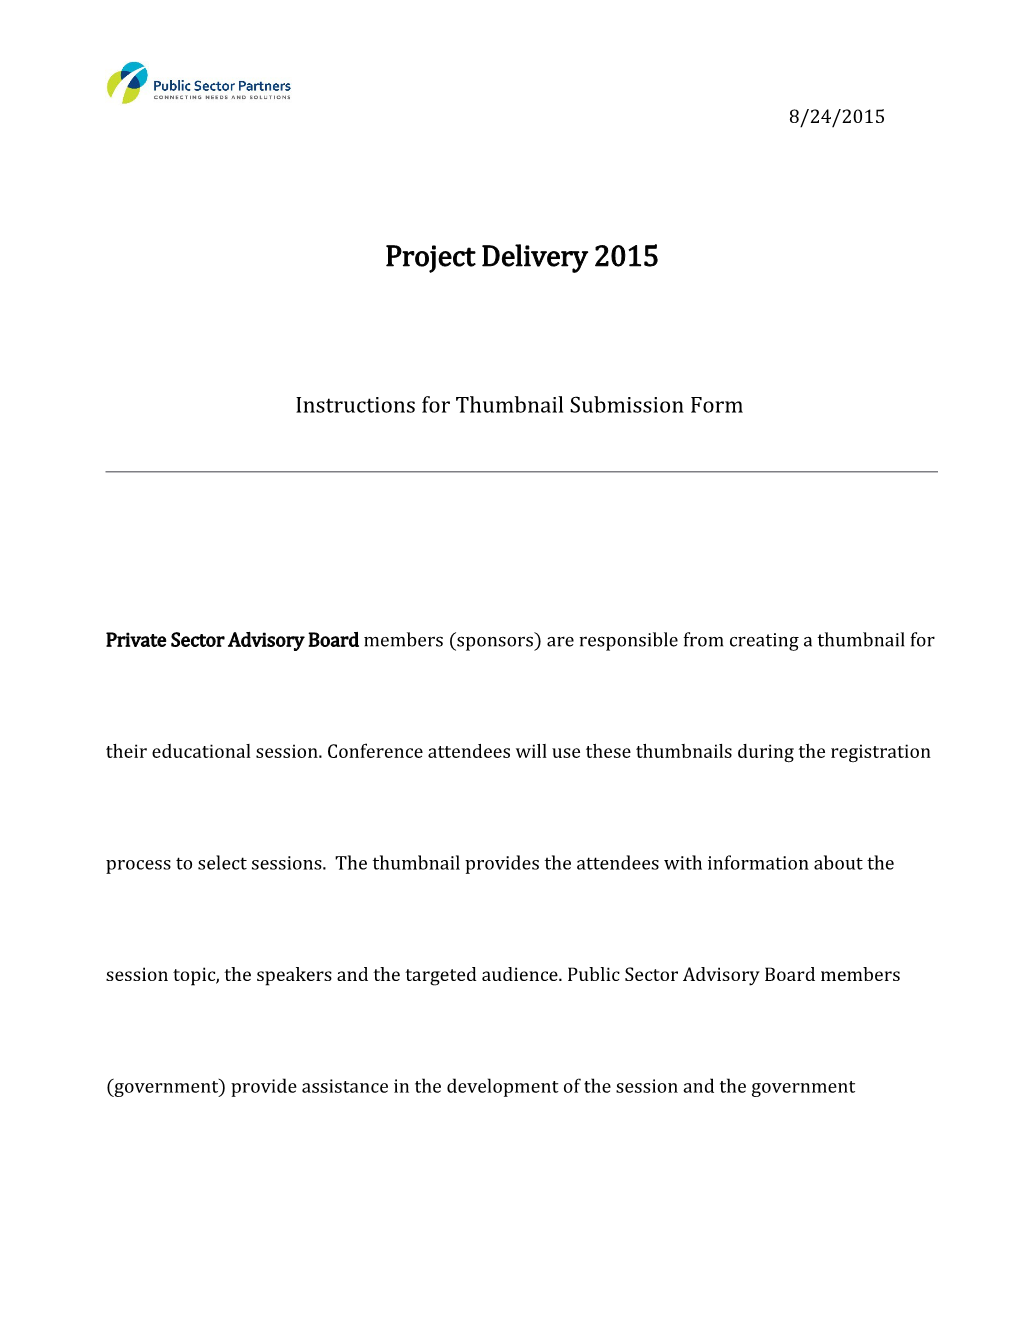 Project Delivery 2015